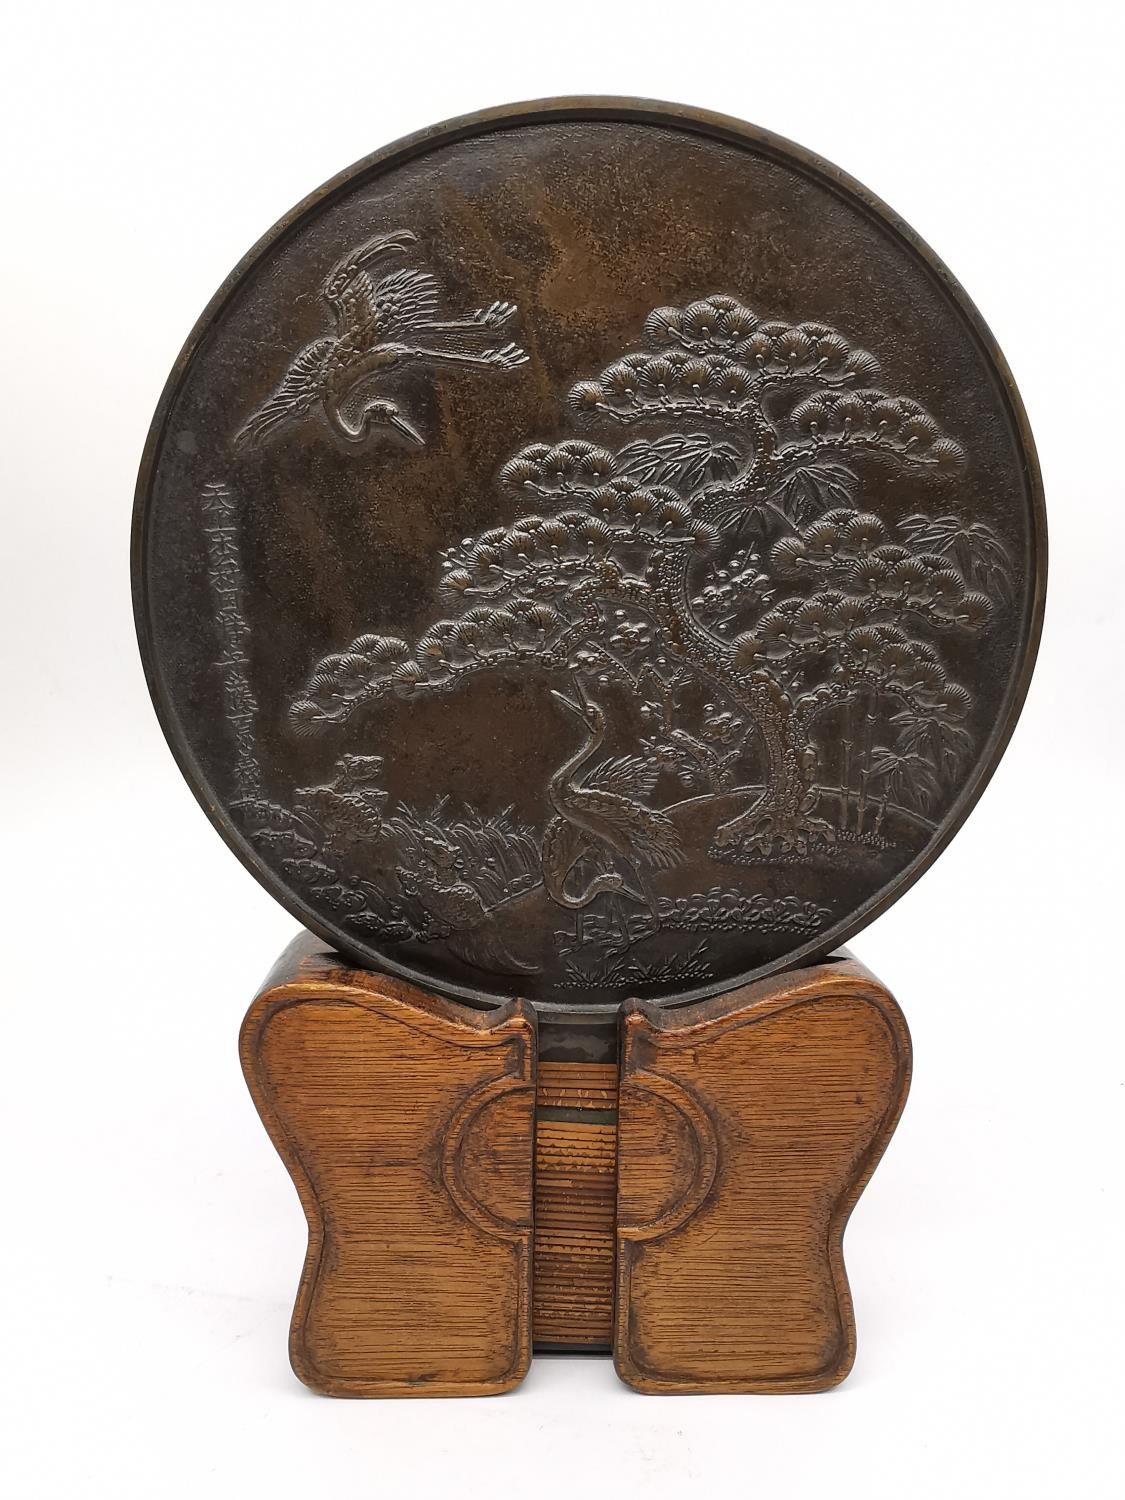 An early 20th century Japanese bronze Kagami mirror on wooden stand, decorated with a pine tree - Image 3 of 9